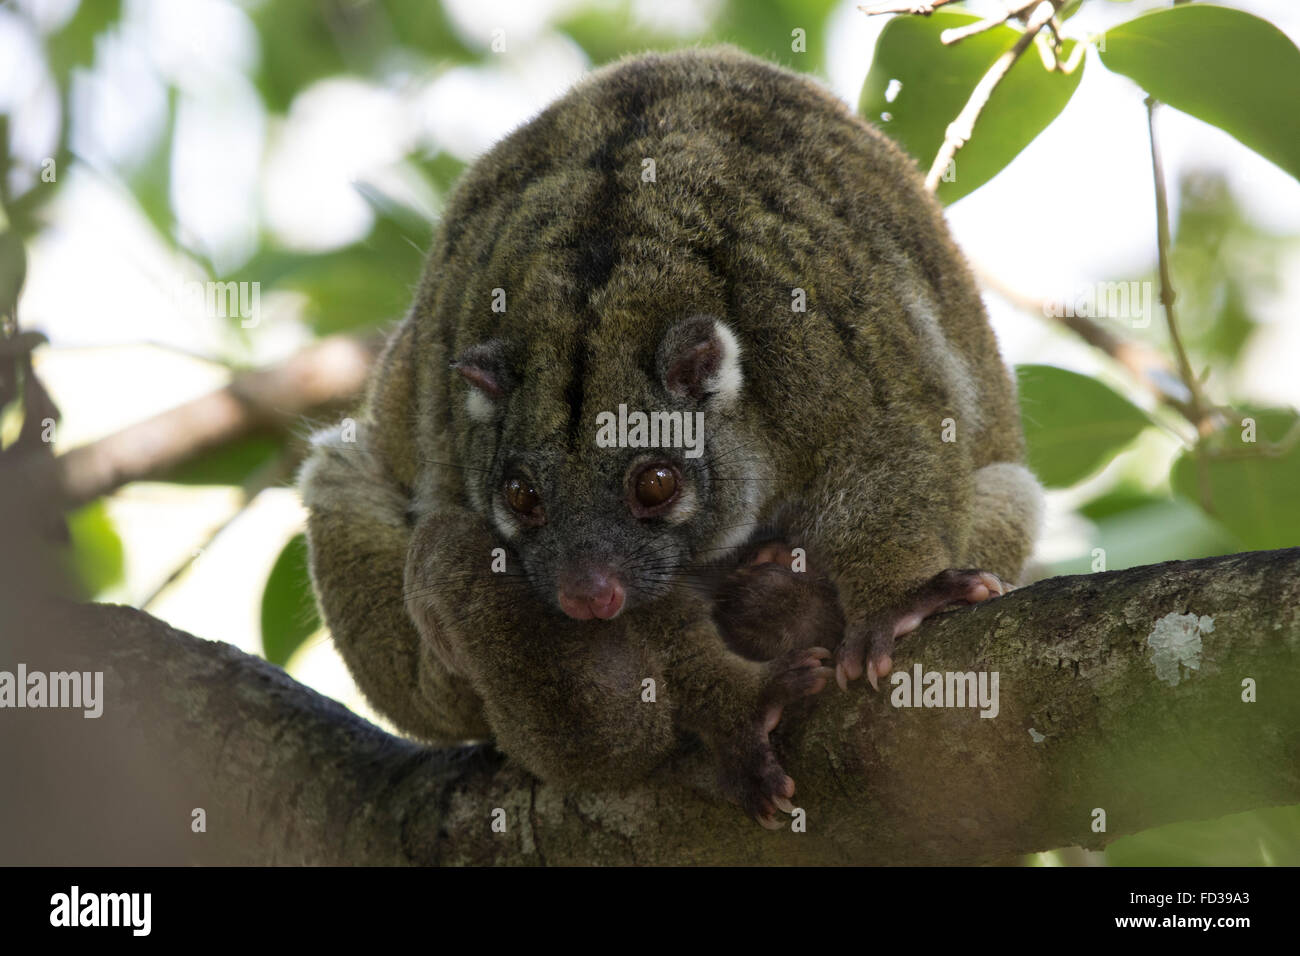 Green Ring-tailed Possums (Pseudochirops archeri) Stock Photo